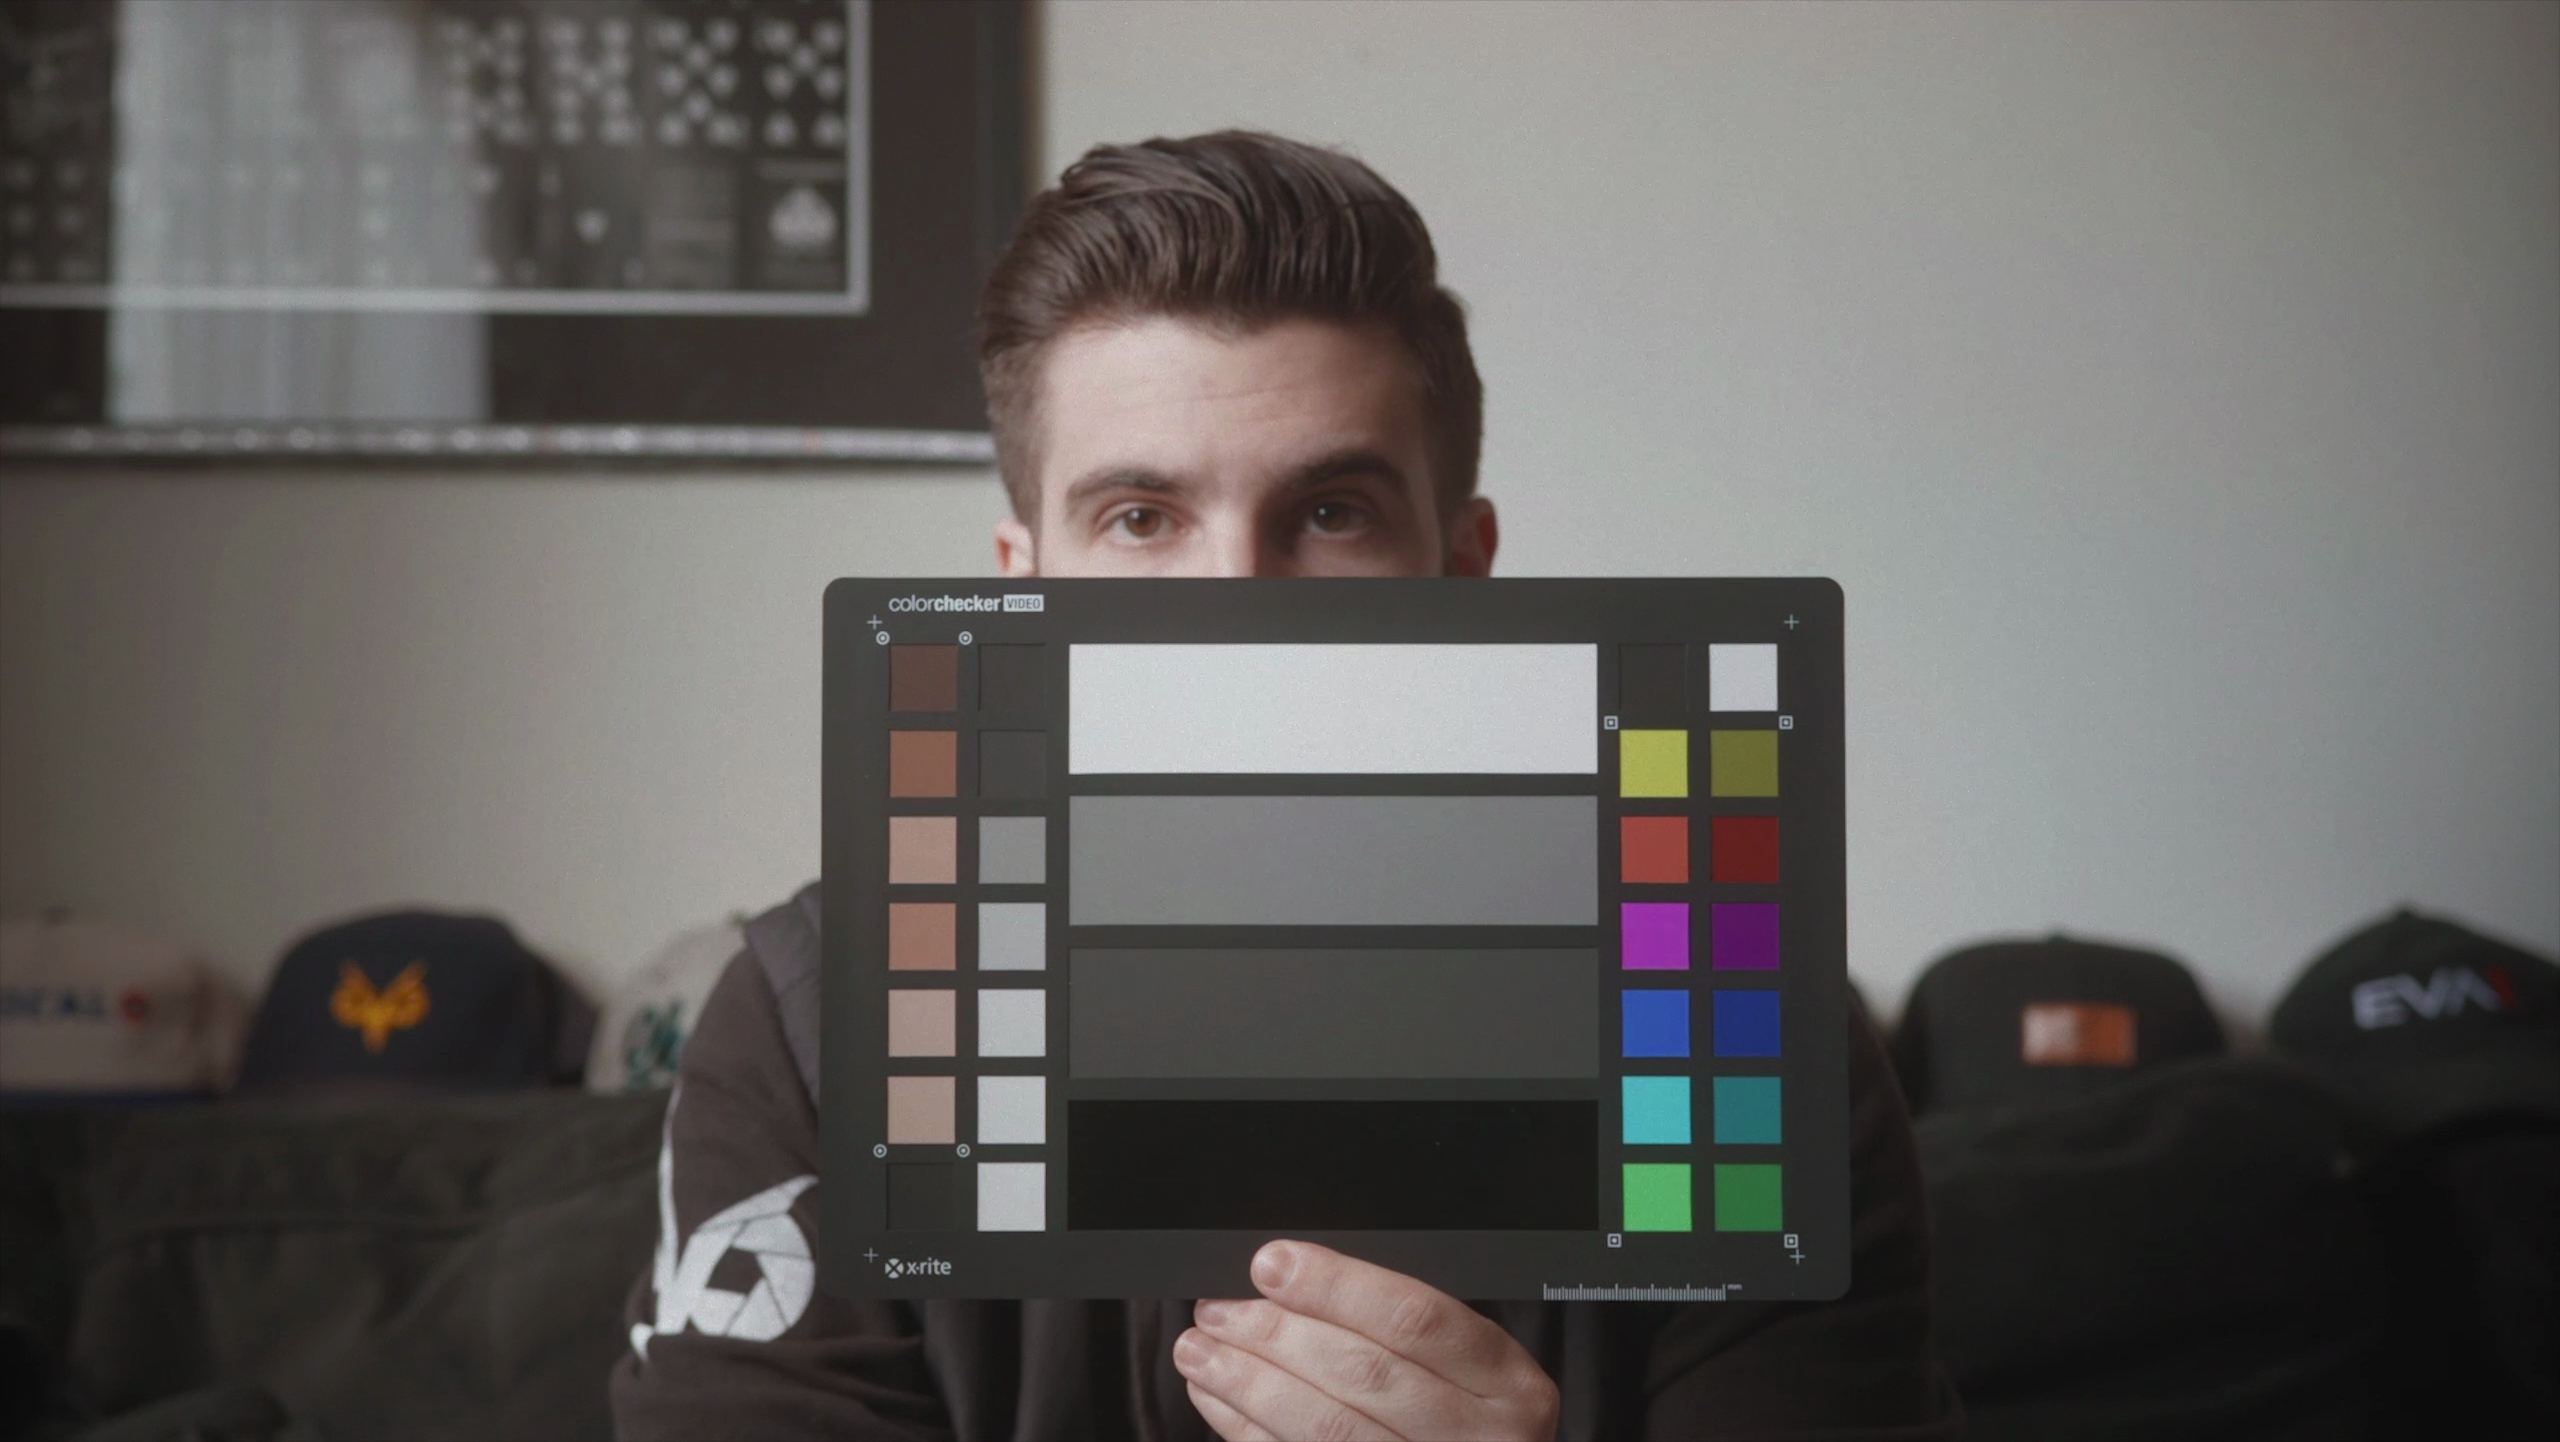 Review: The i1 Filmmaker Kit and Colorchecker Video from X-Rite by